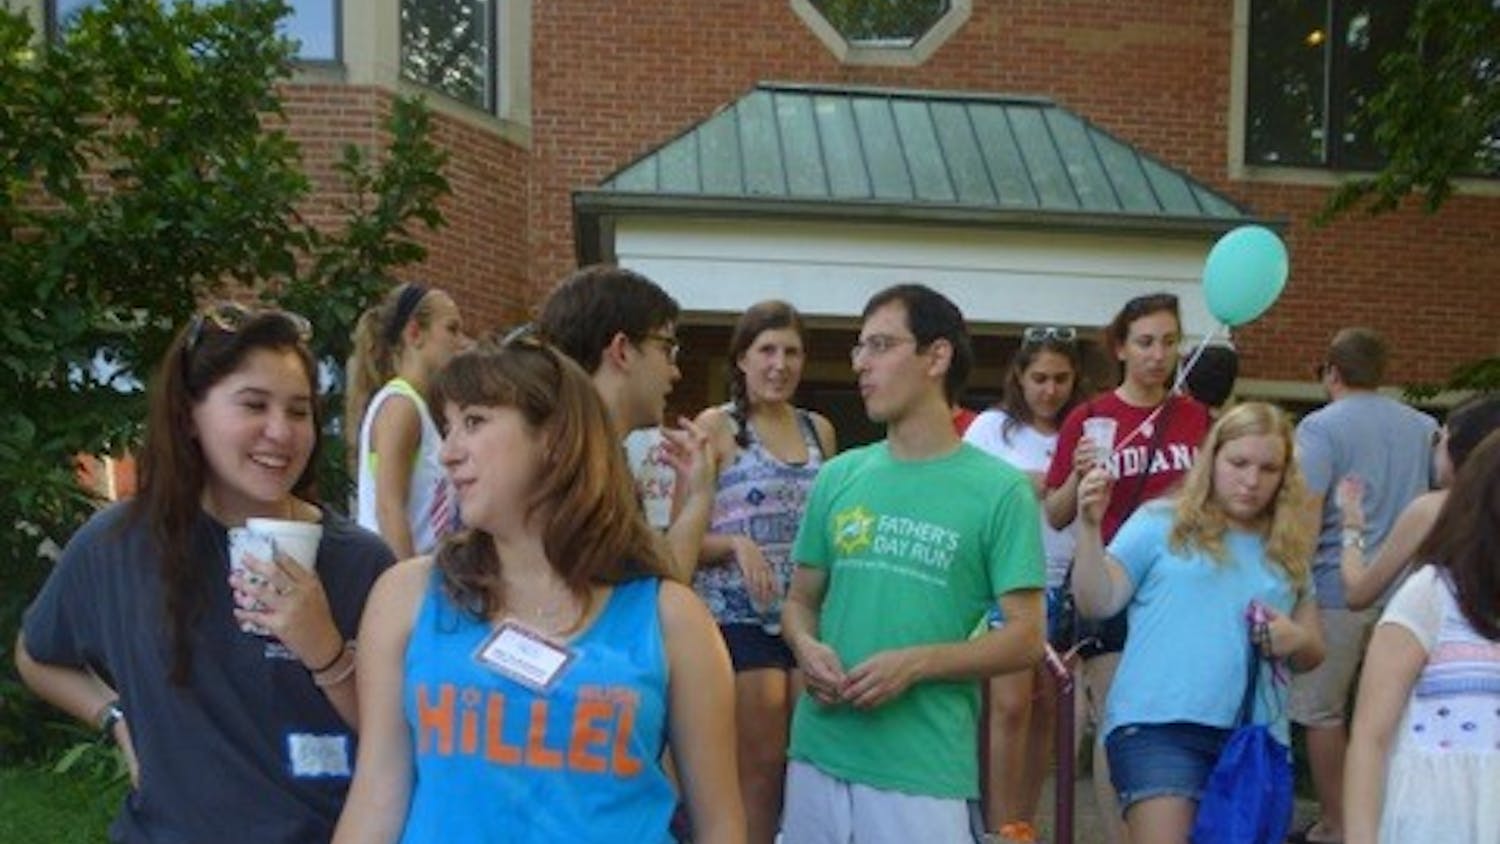 Over 20 Hillel affiliated clubs set up tables in front of the Hillel house on Sunday evening during the annual 'Welcome Back BBQ' event. 